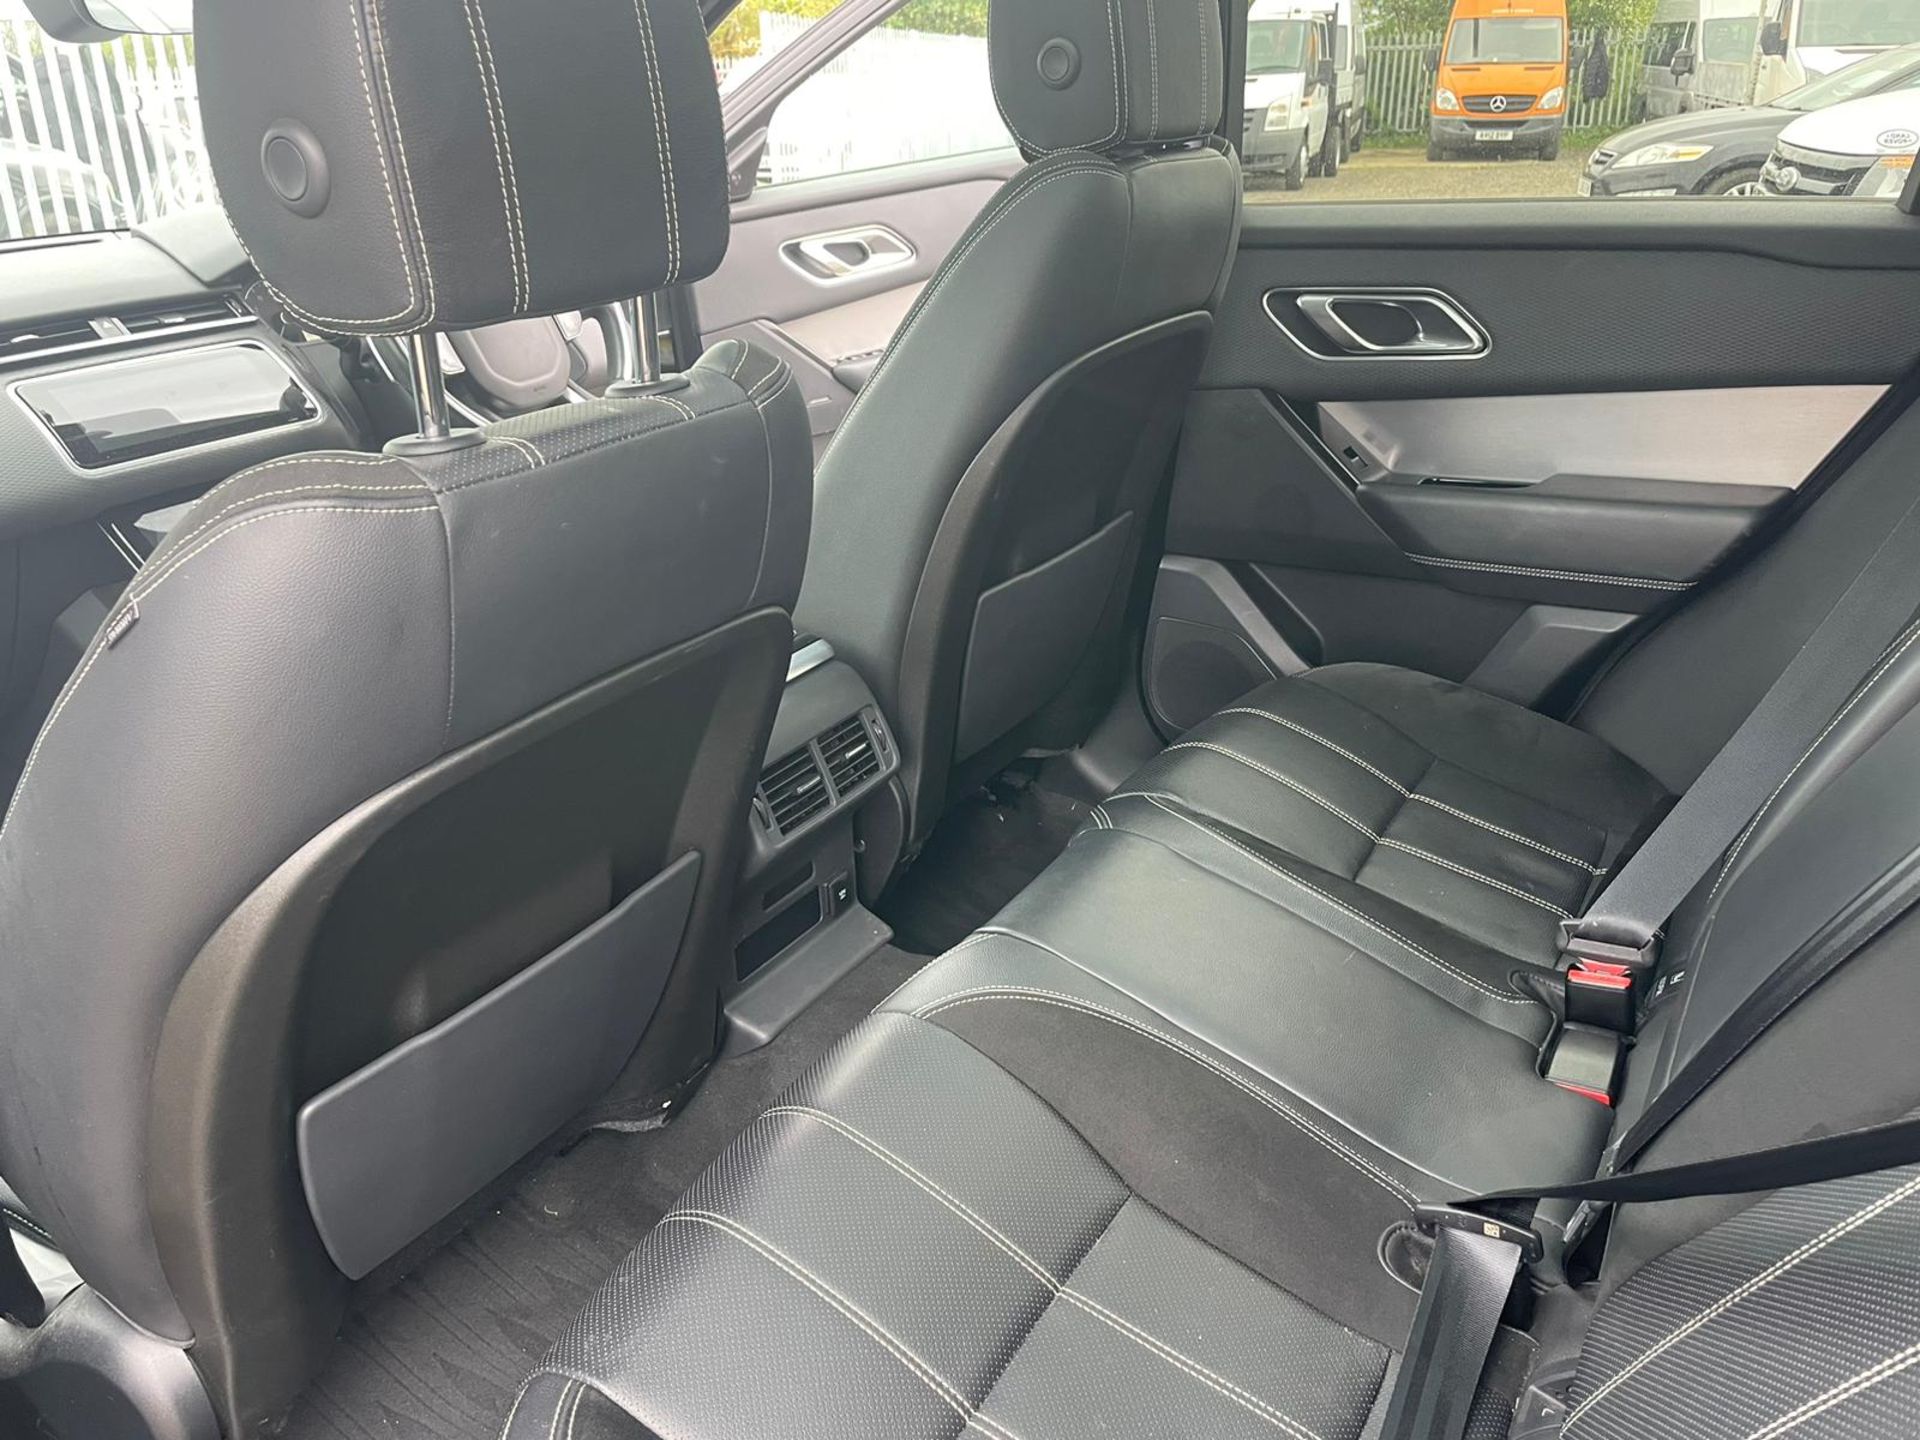 Land Rover Range Rover Velar 2.0 D240 R-Dynamic S 2018 '18 Reg' 4WD - Panoramic Roof- ULEZ Compliant - Image 31 of 33